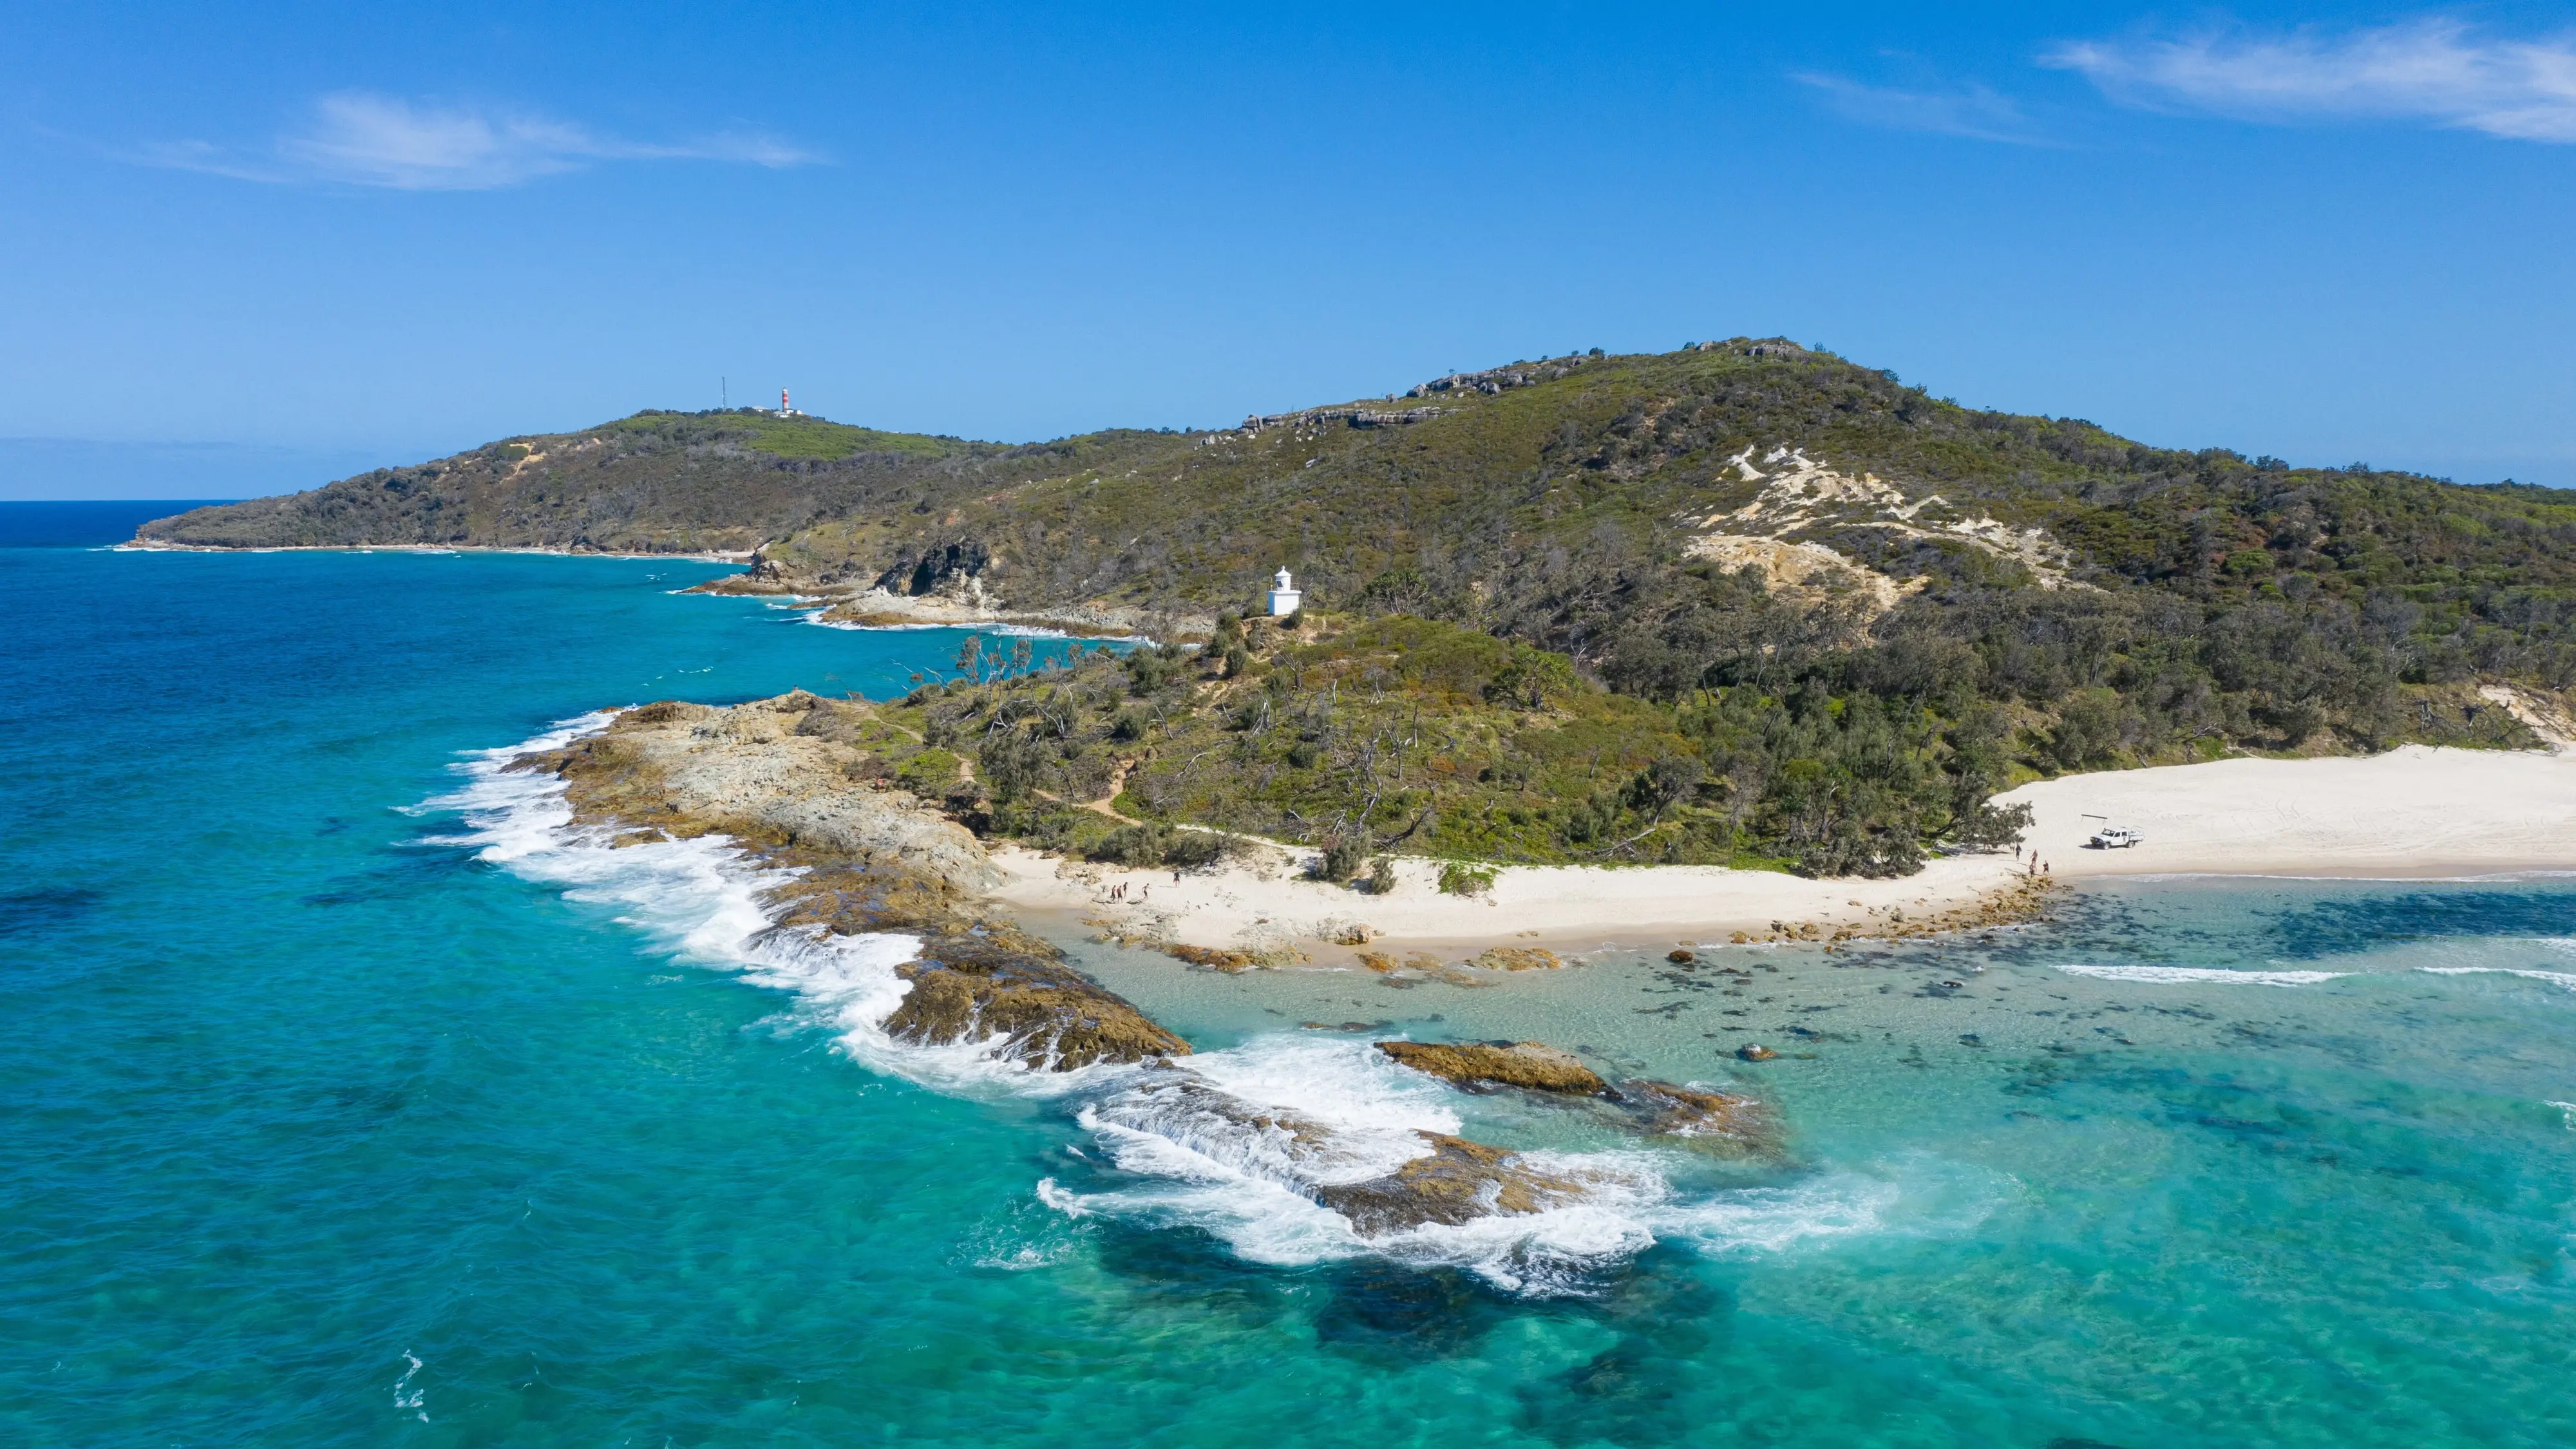 Tree-covered Moreton Island in the sun, with sandy shore and turquoise waters. Image credit: Tourism and Events Queensland